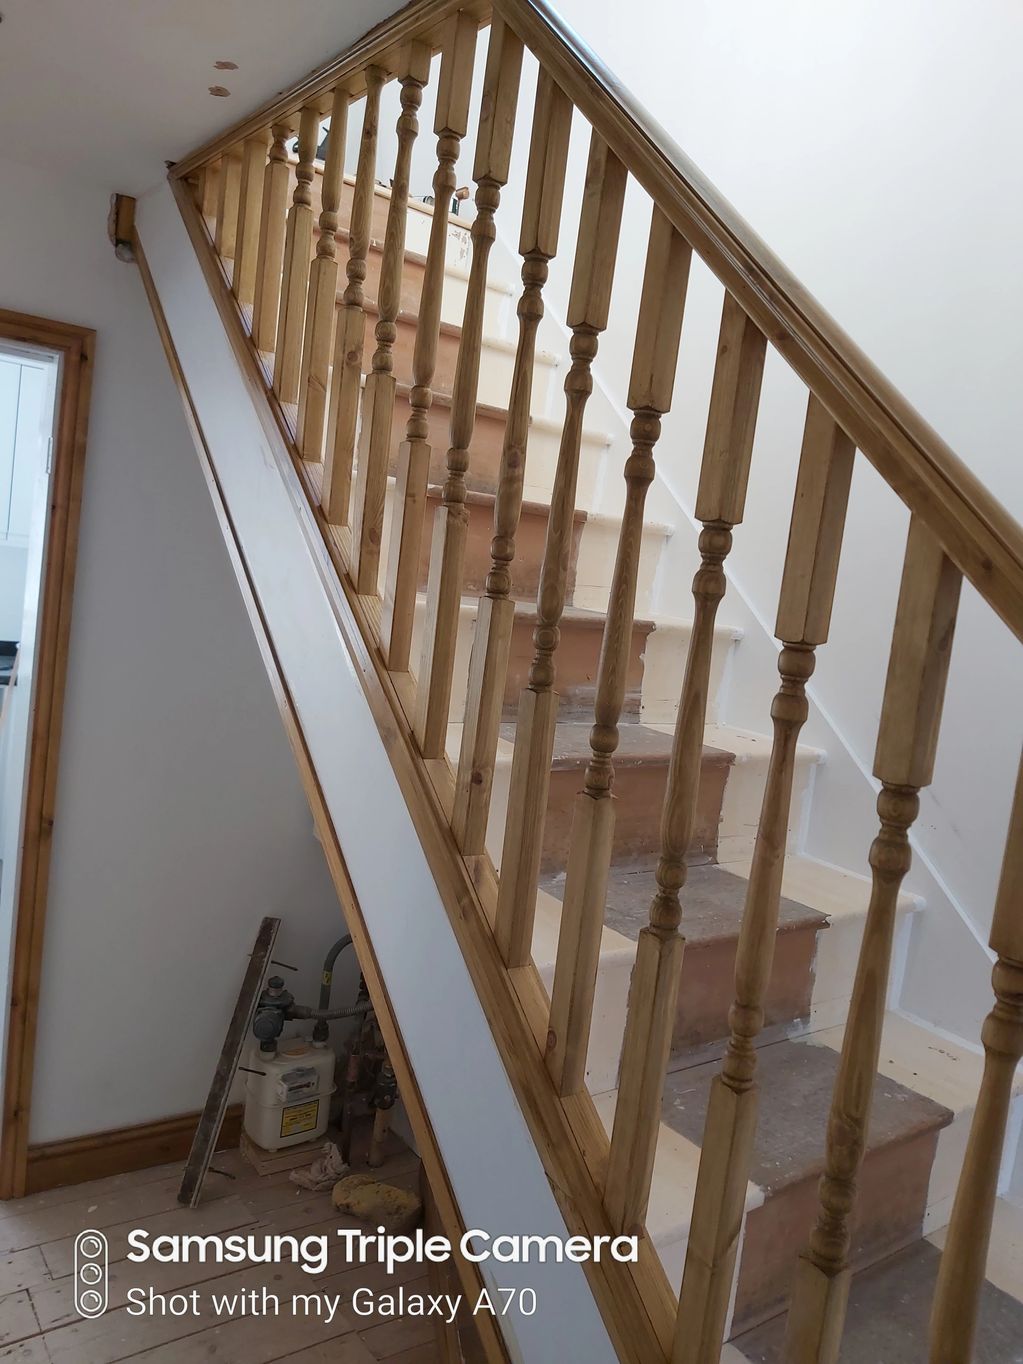 New polished wood stairparts and trim create an open airy  feel to what was a closed dull space.